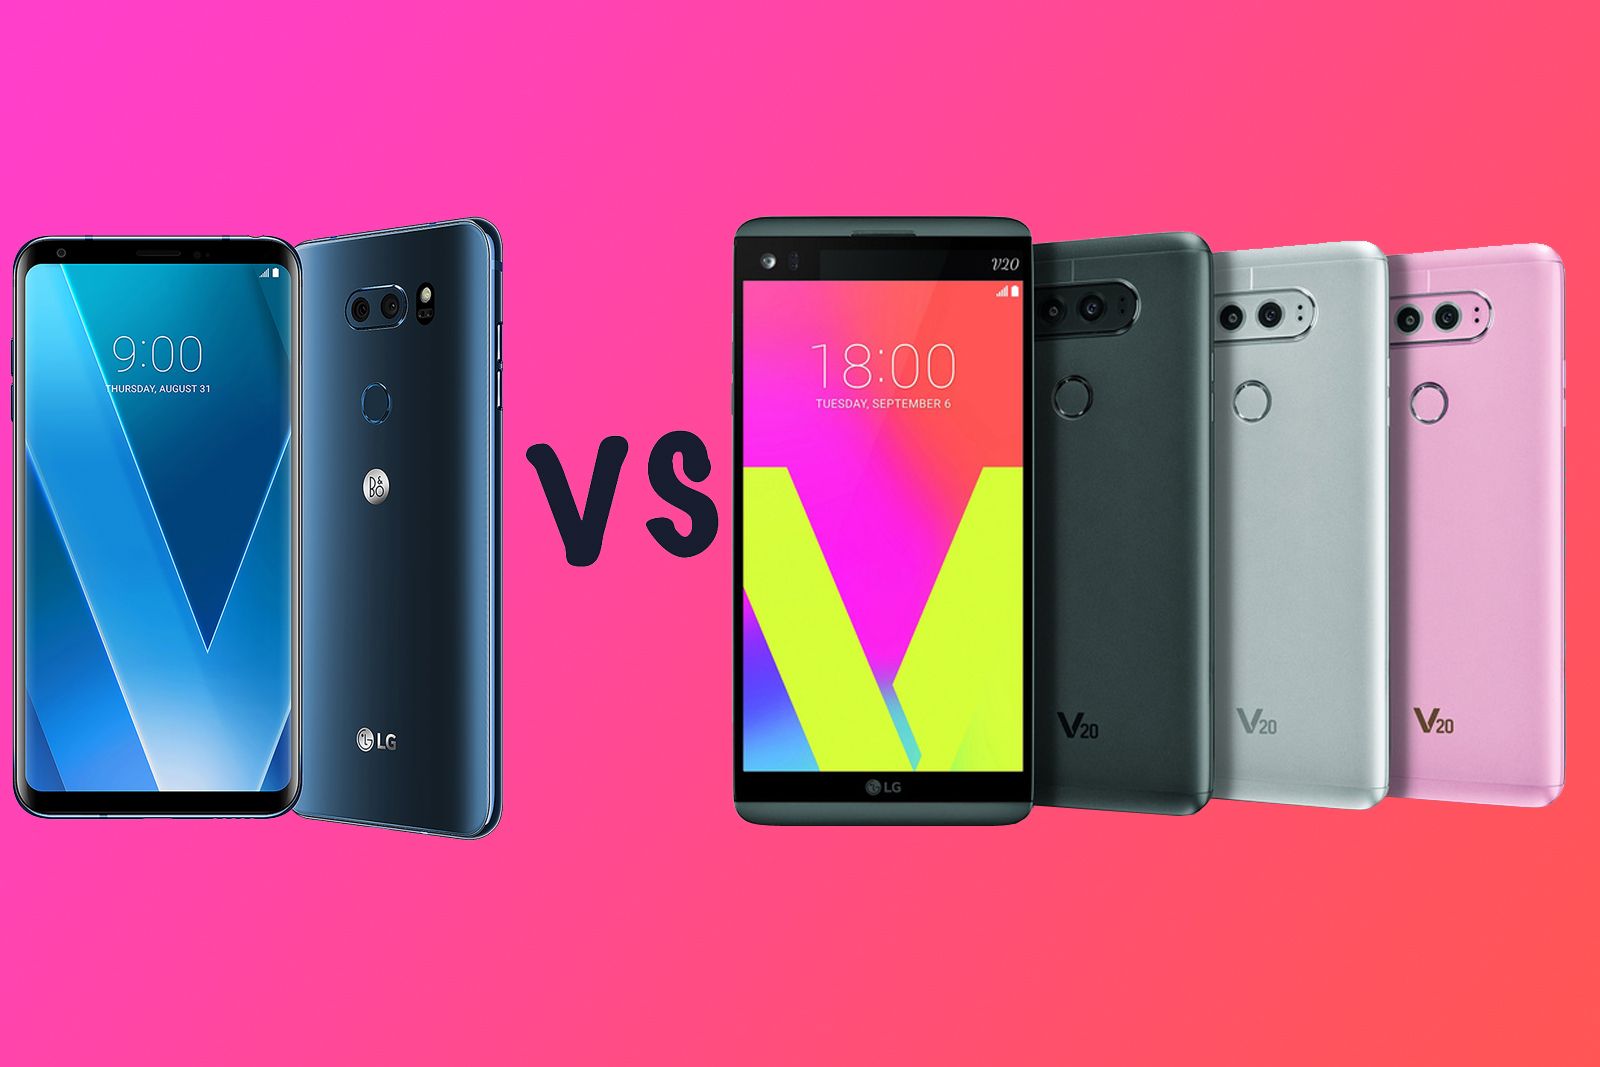 LG V30 vs LG V20 Whats the difference image 1